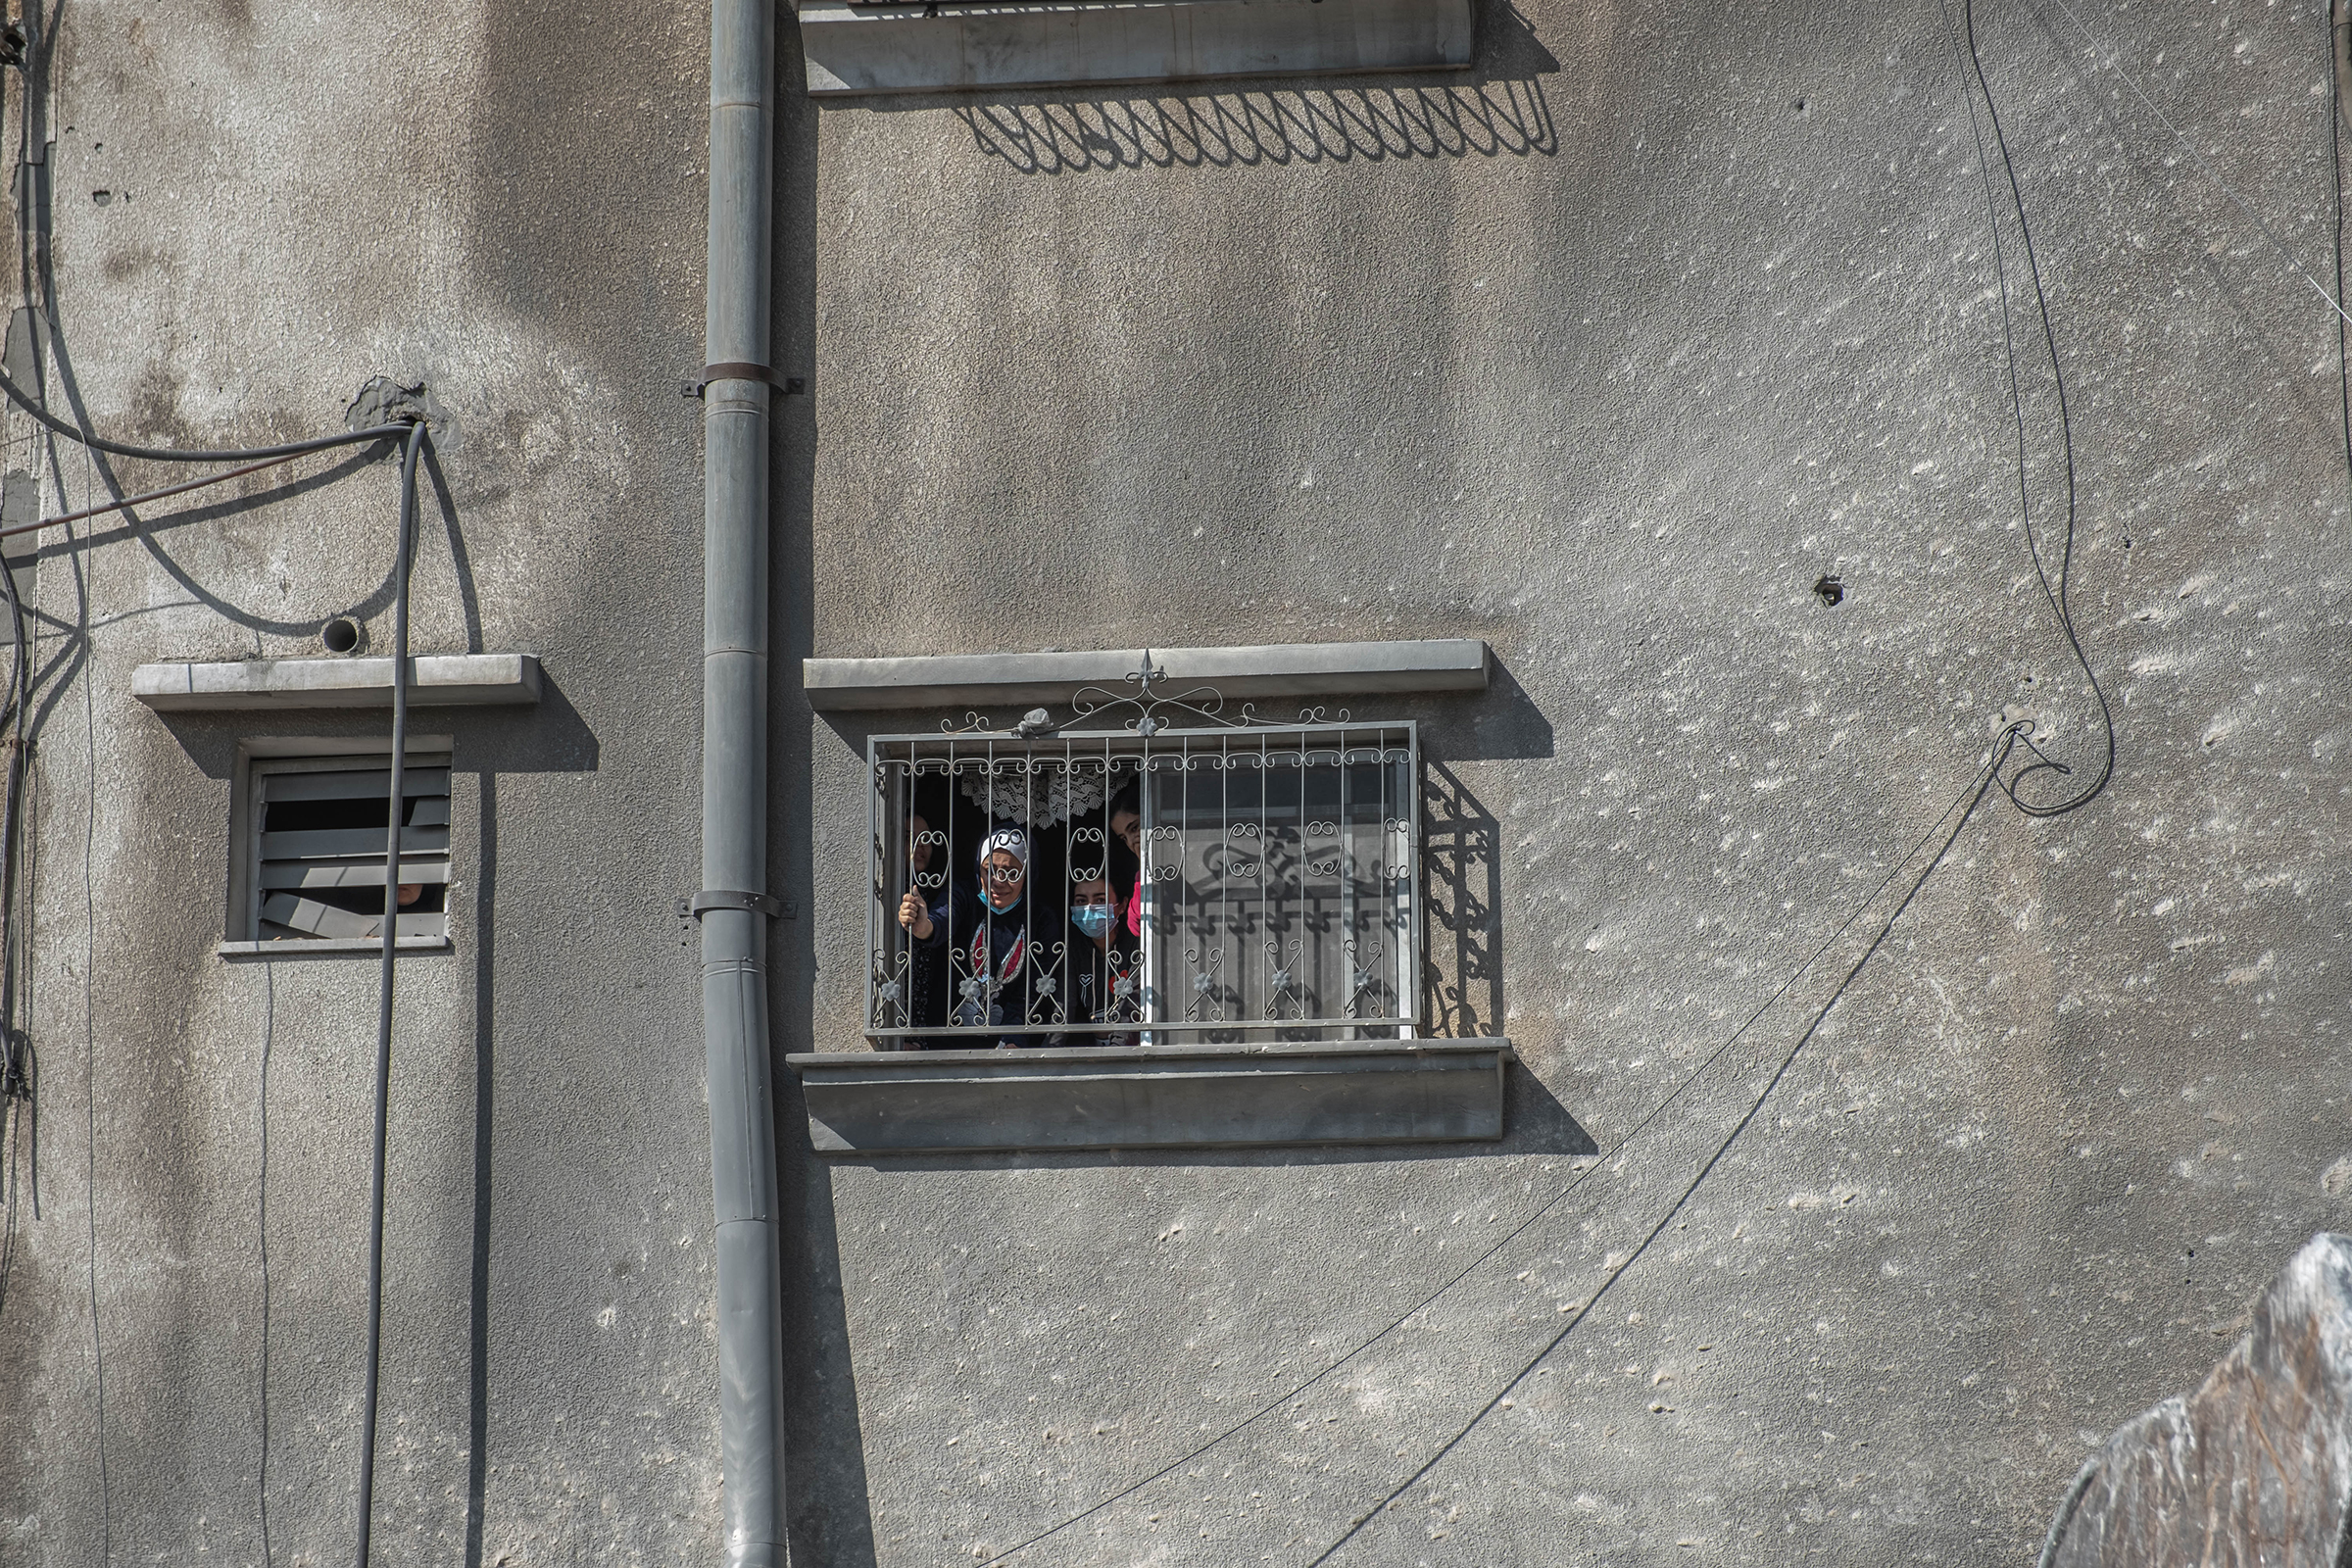 Palestinian women look out from a window at the rubble of a destroyed house in Gaza City on May 16, 2021.